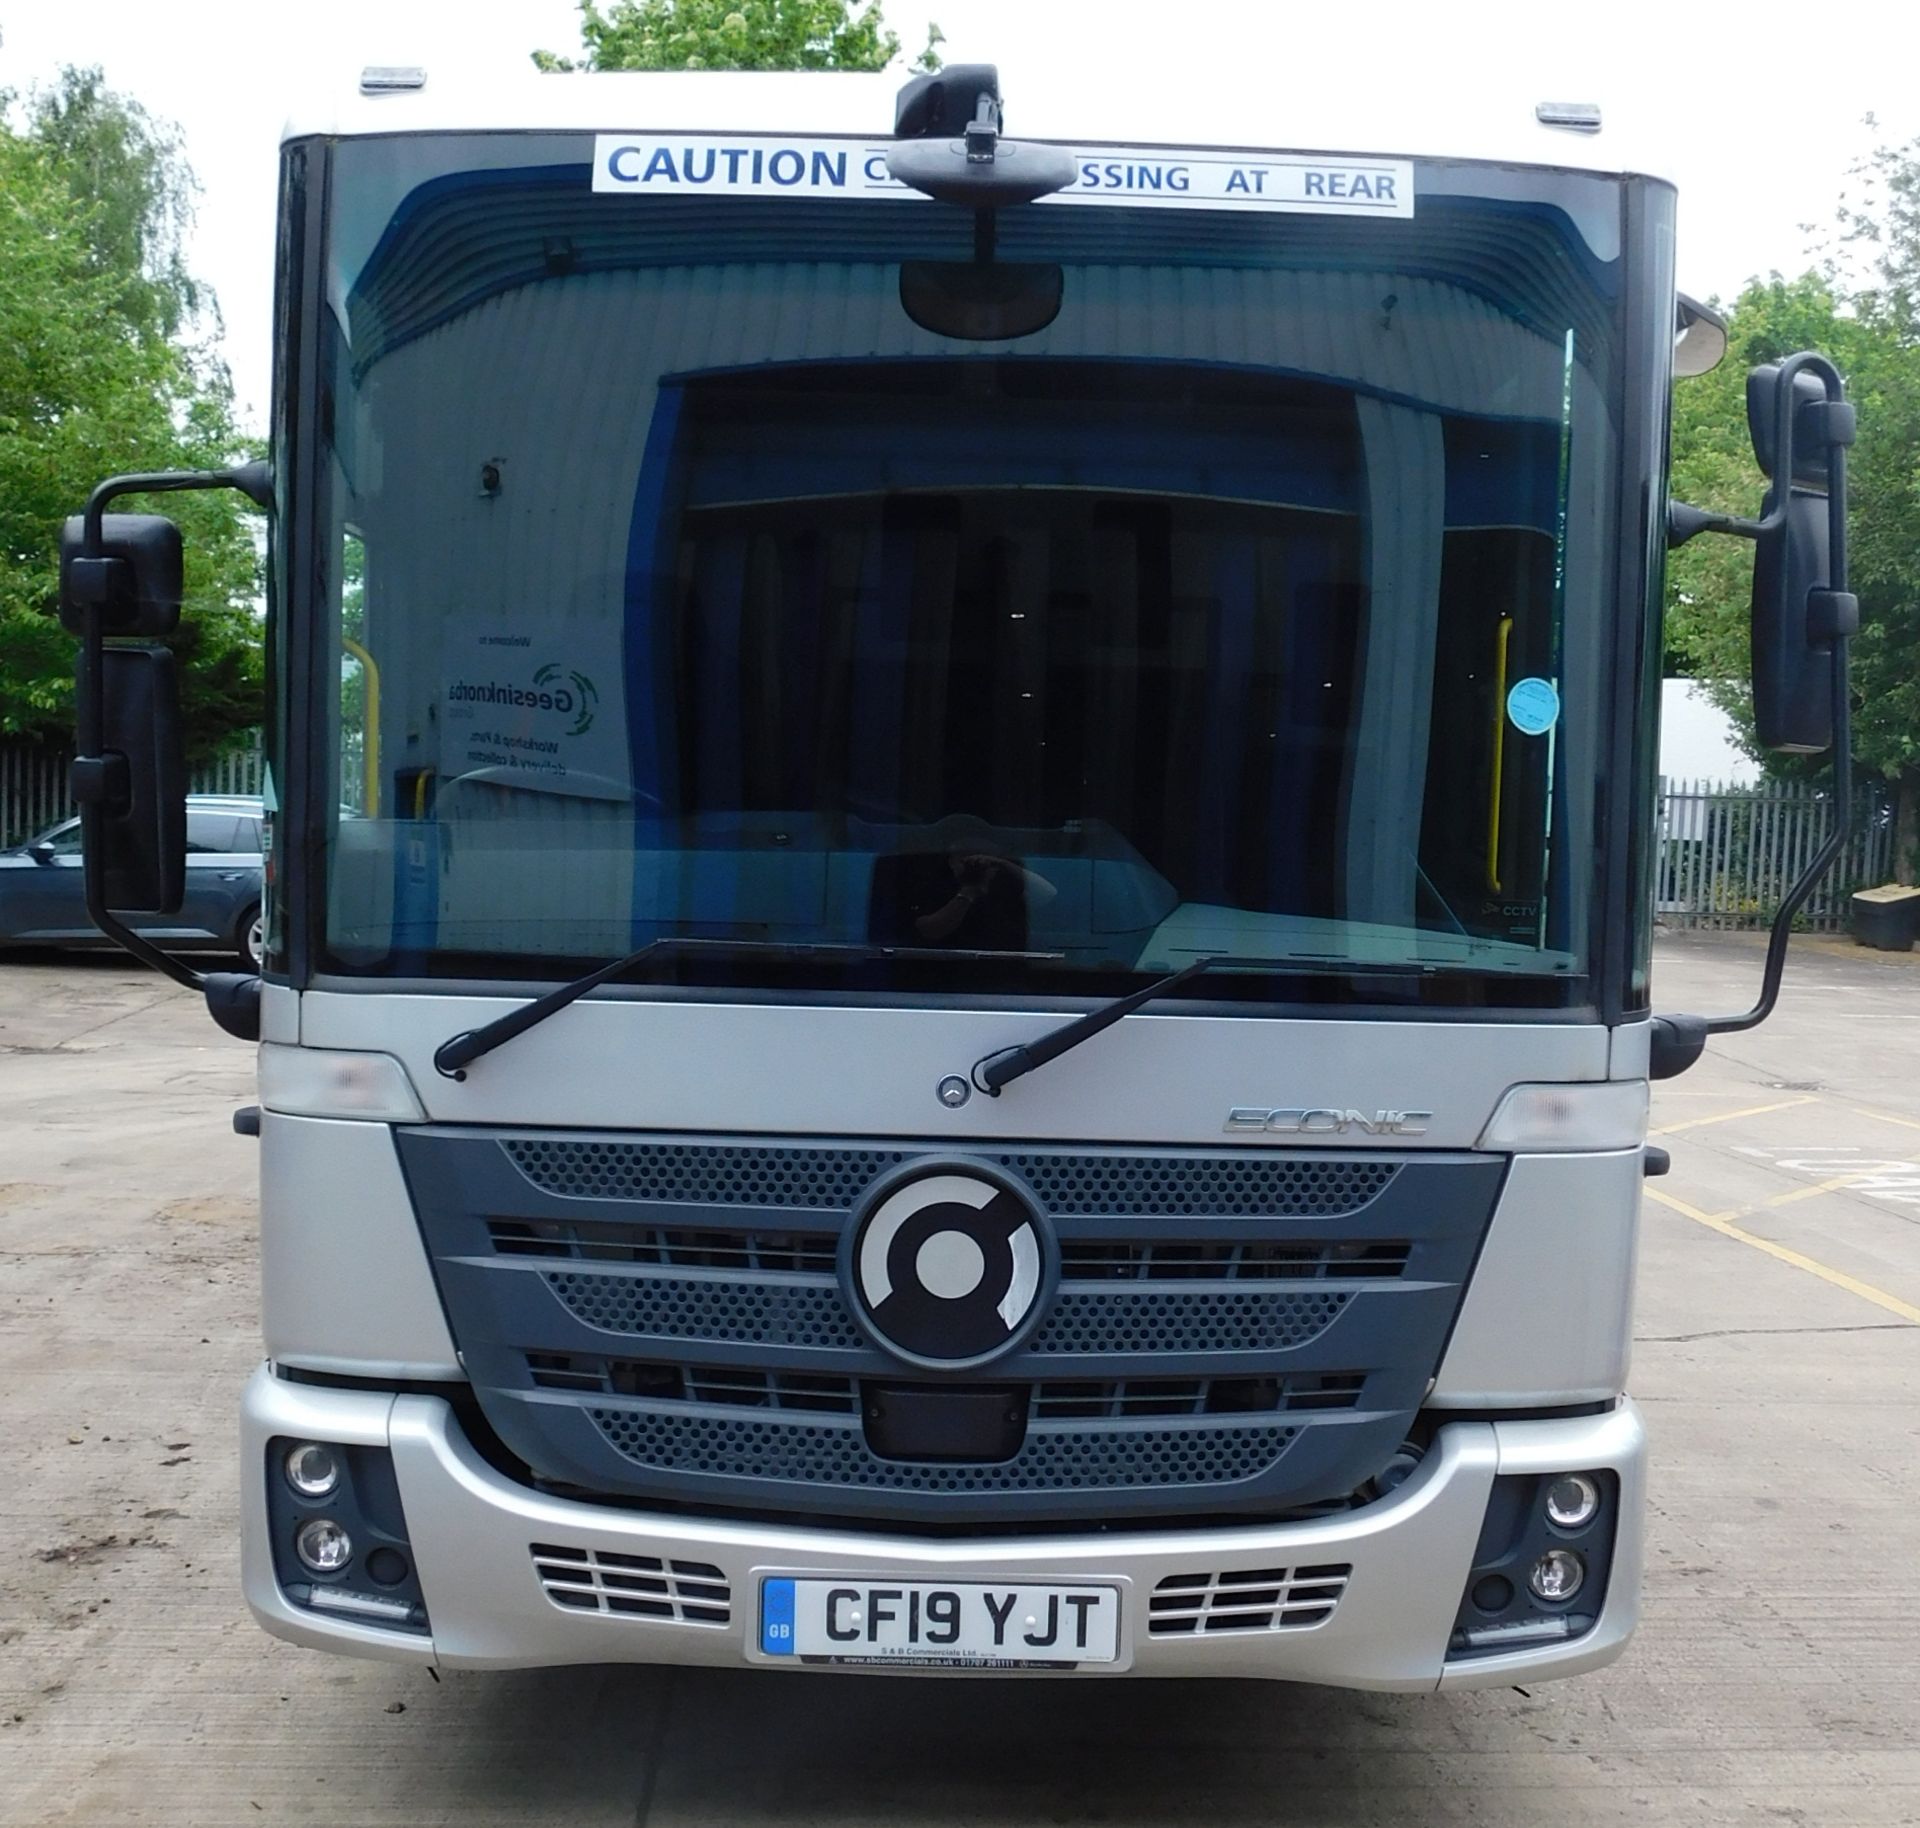 Mercedes/Econic EMOSS 2620, NGE-L62N, 6x2, Rear Axle Steer, Electric Refuse Disposal Lorry, GPM 4 - Image 5 of 32